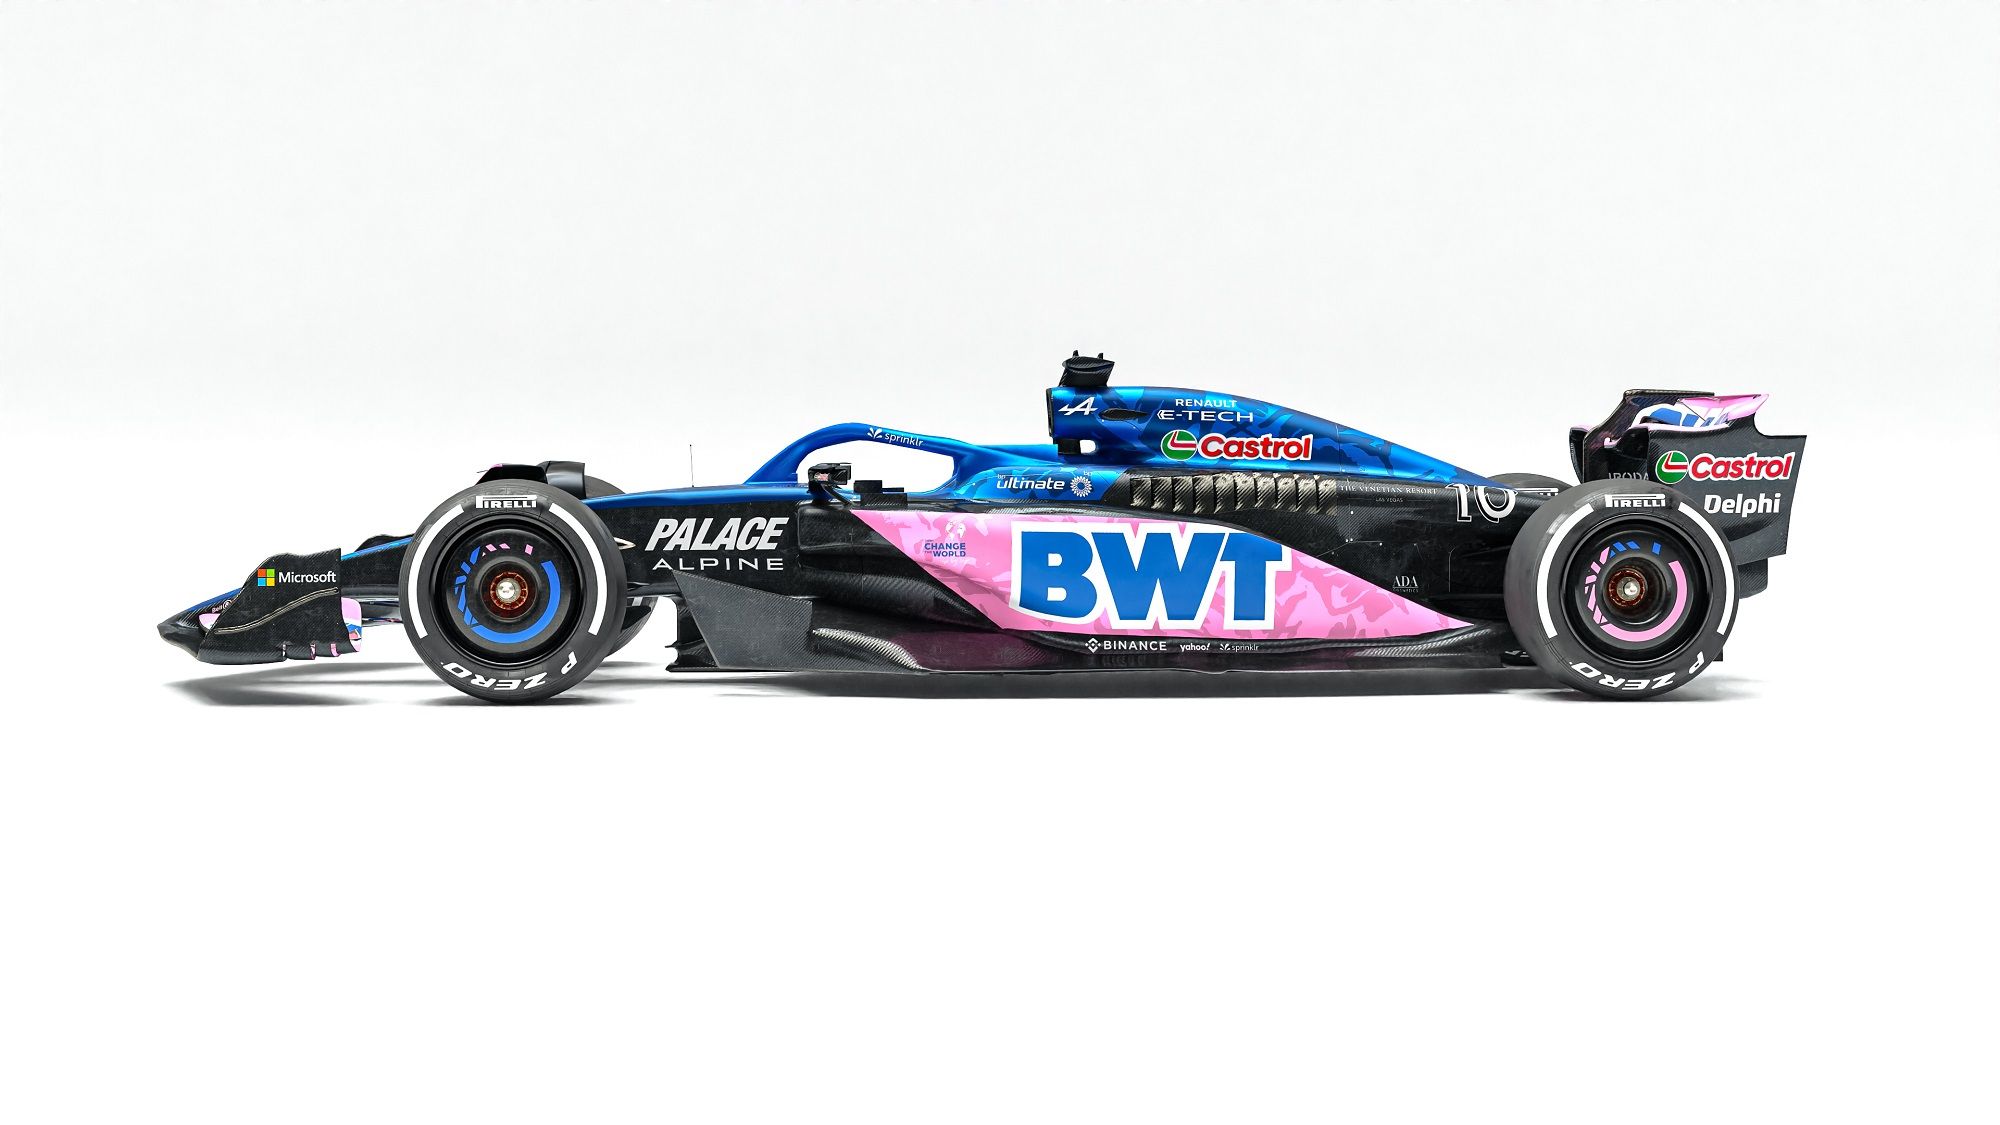 F1 News: Alpine's New Las Vegas Livery To Celebrates Its Partnership With  Palace Kappa - F1 Briefings: Formula 1 News, Rumors, Standings and More